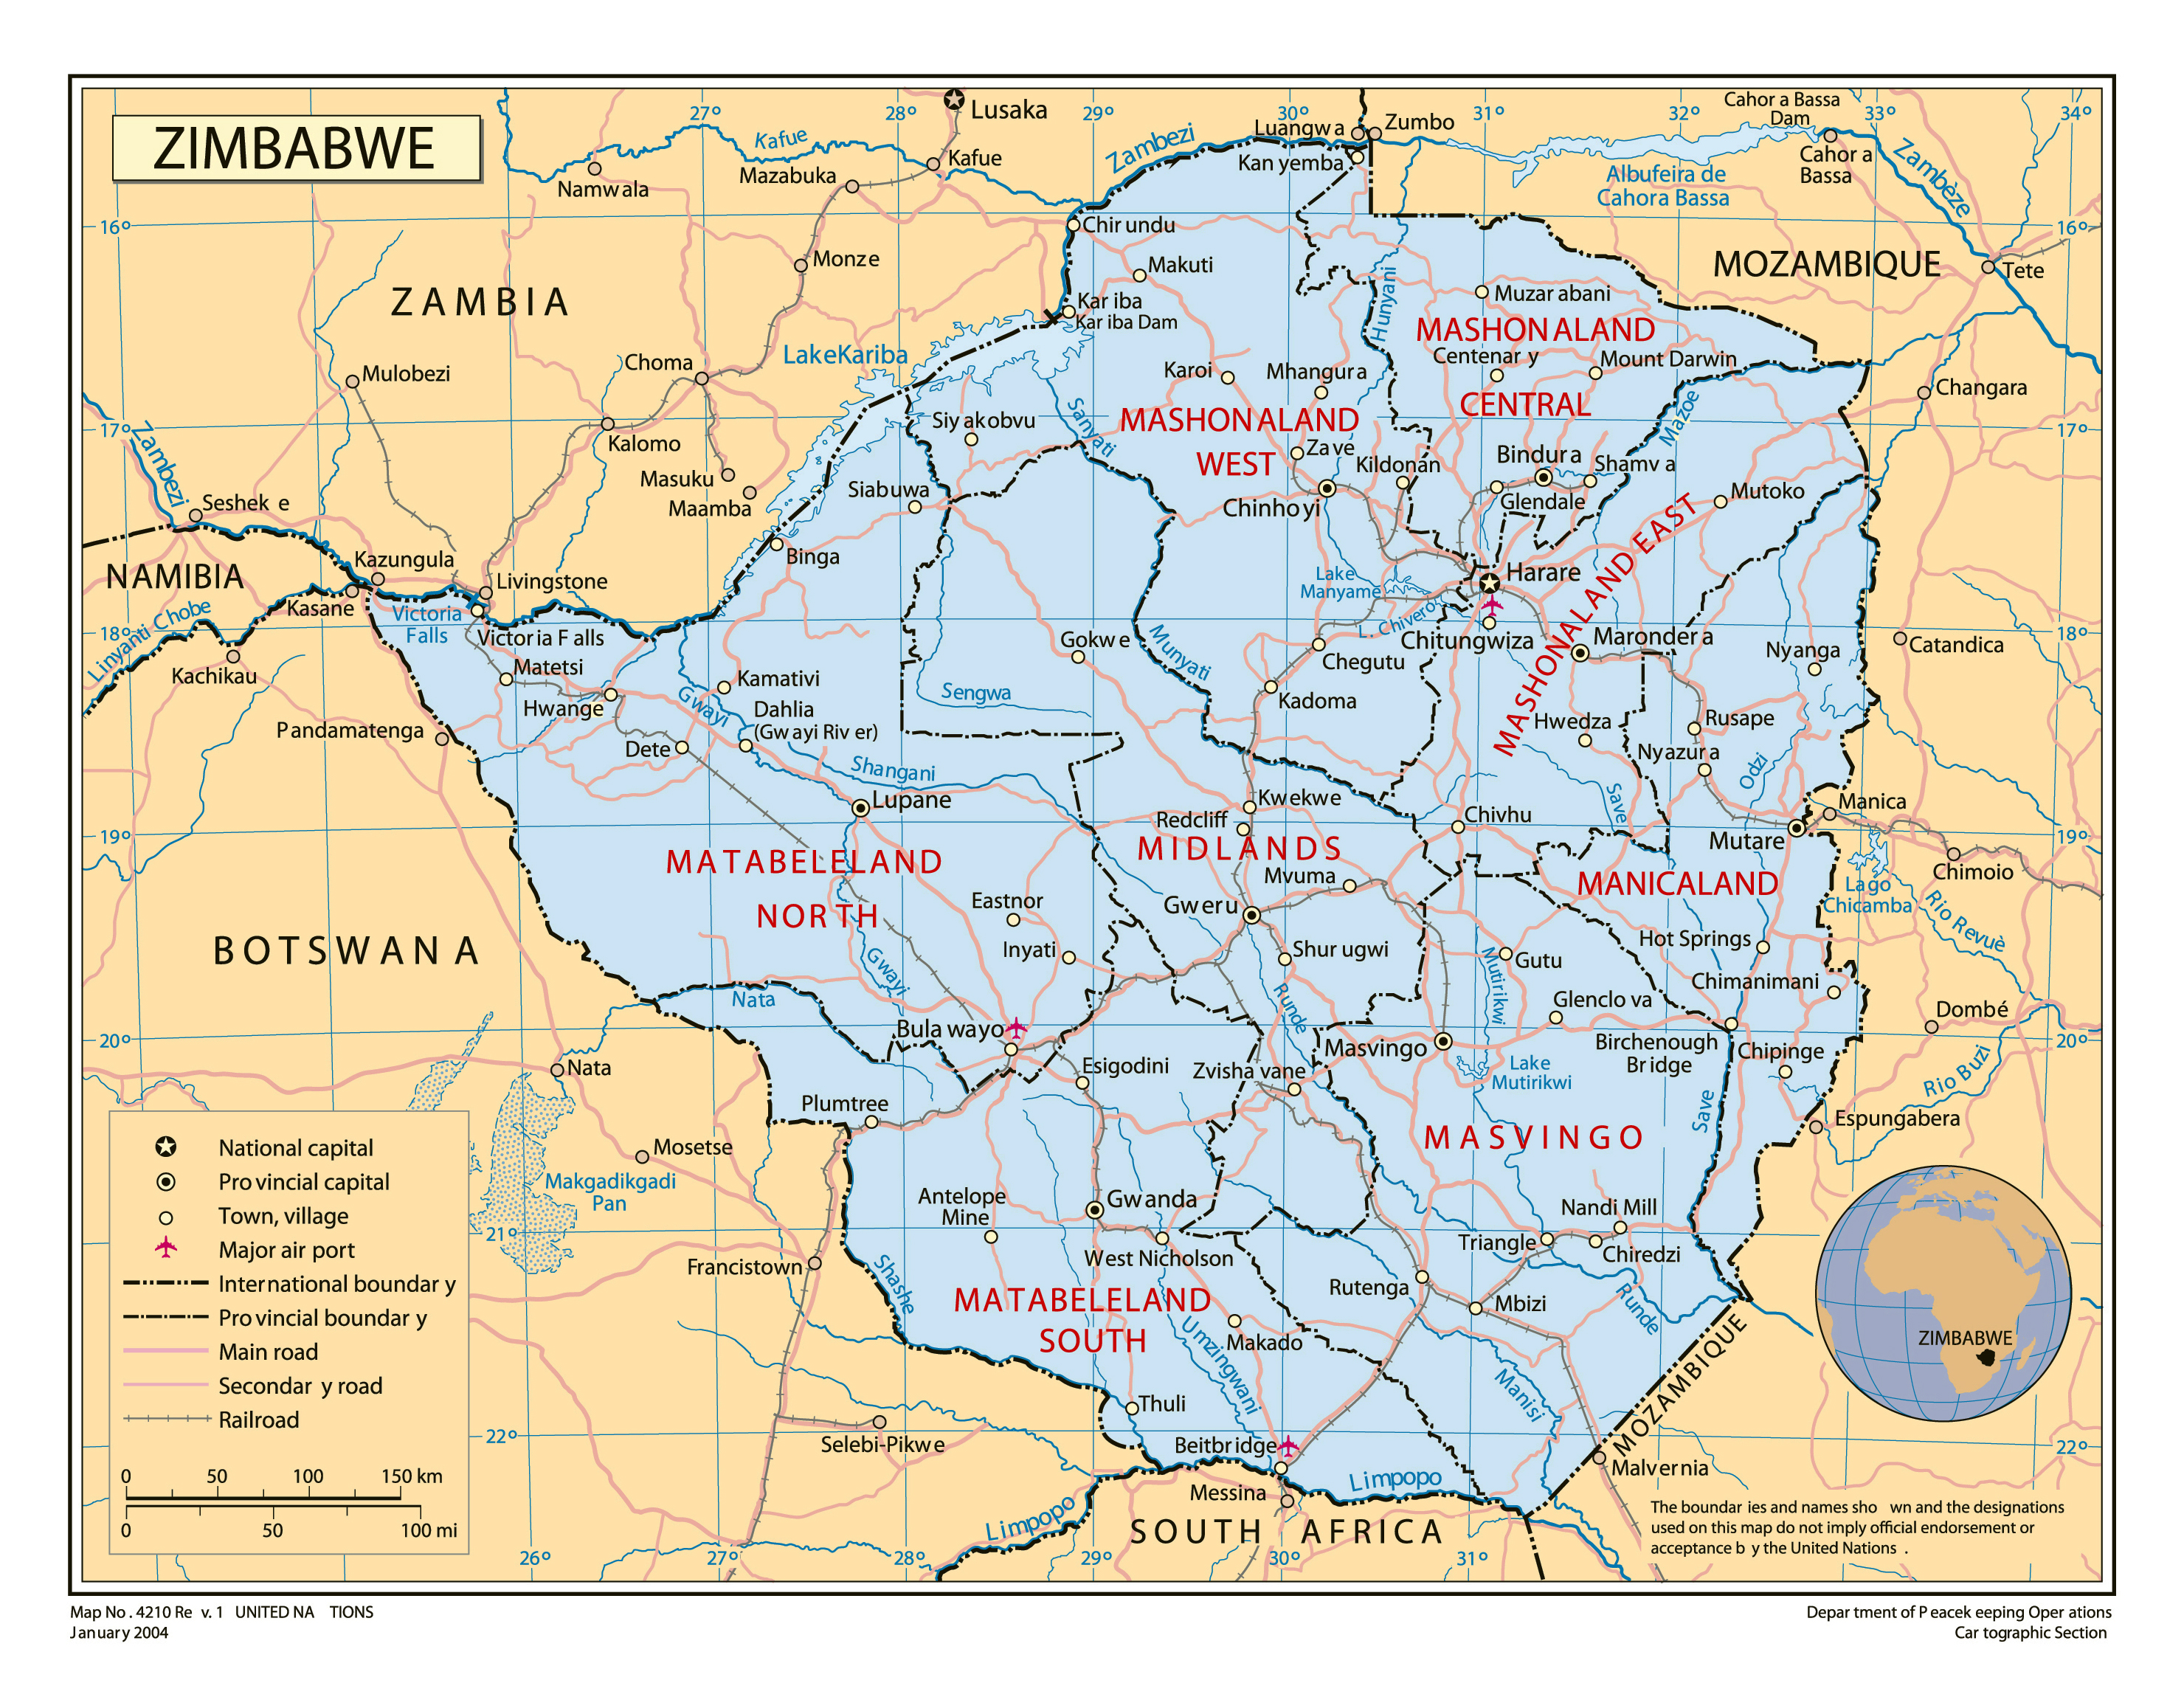 https://www.mapsland.com/maps/africa/zimbabwe/large-detailed-political-and-administrative-map-of-zimbabwe-with-roads-railroads-cities-and-airports.jpg